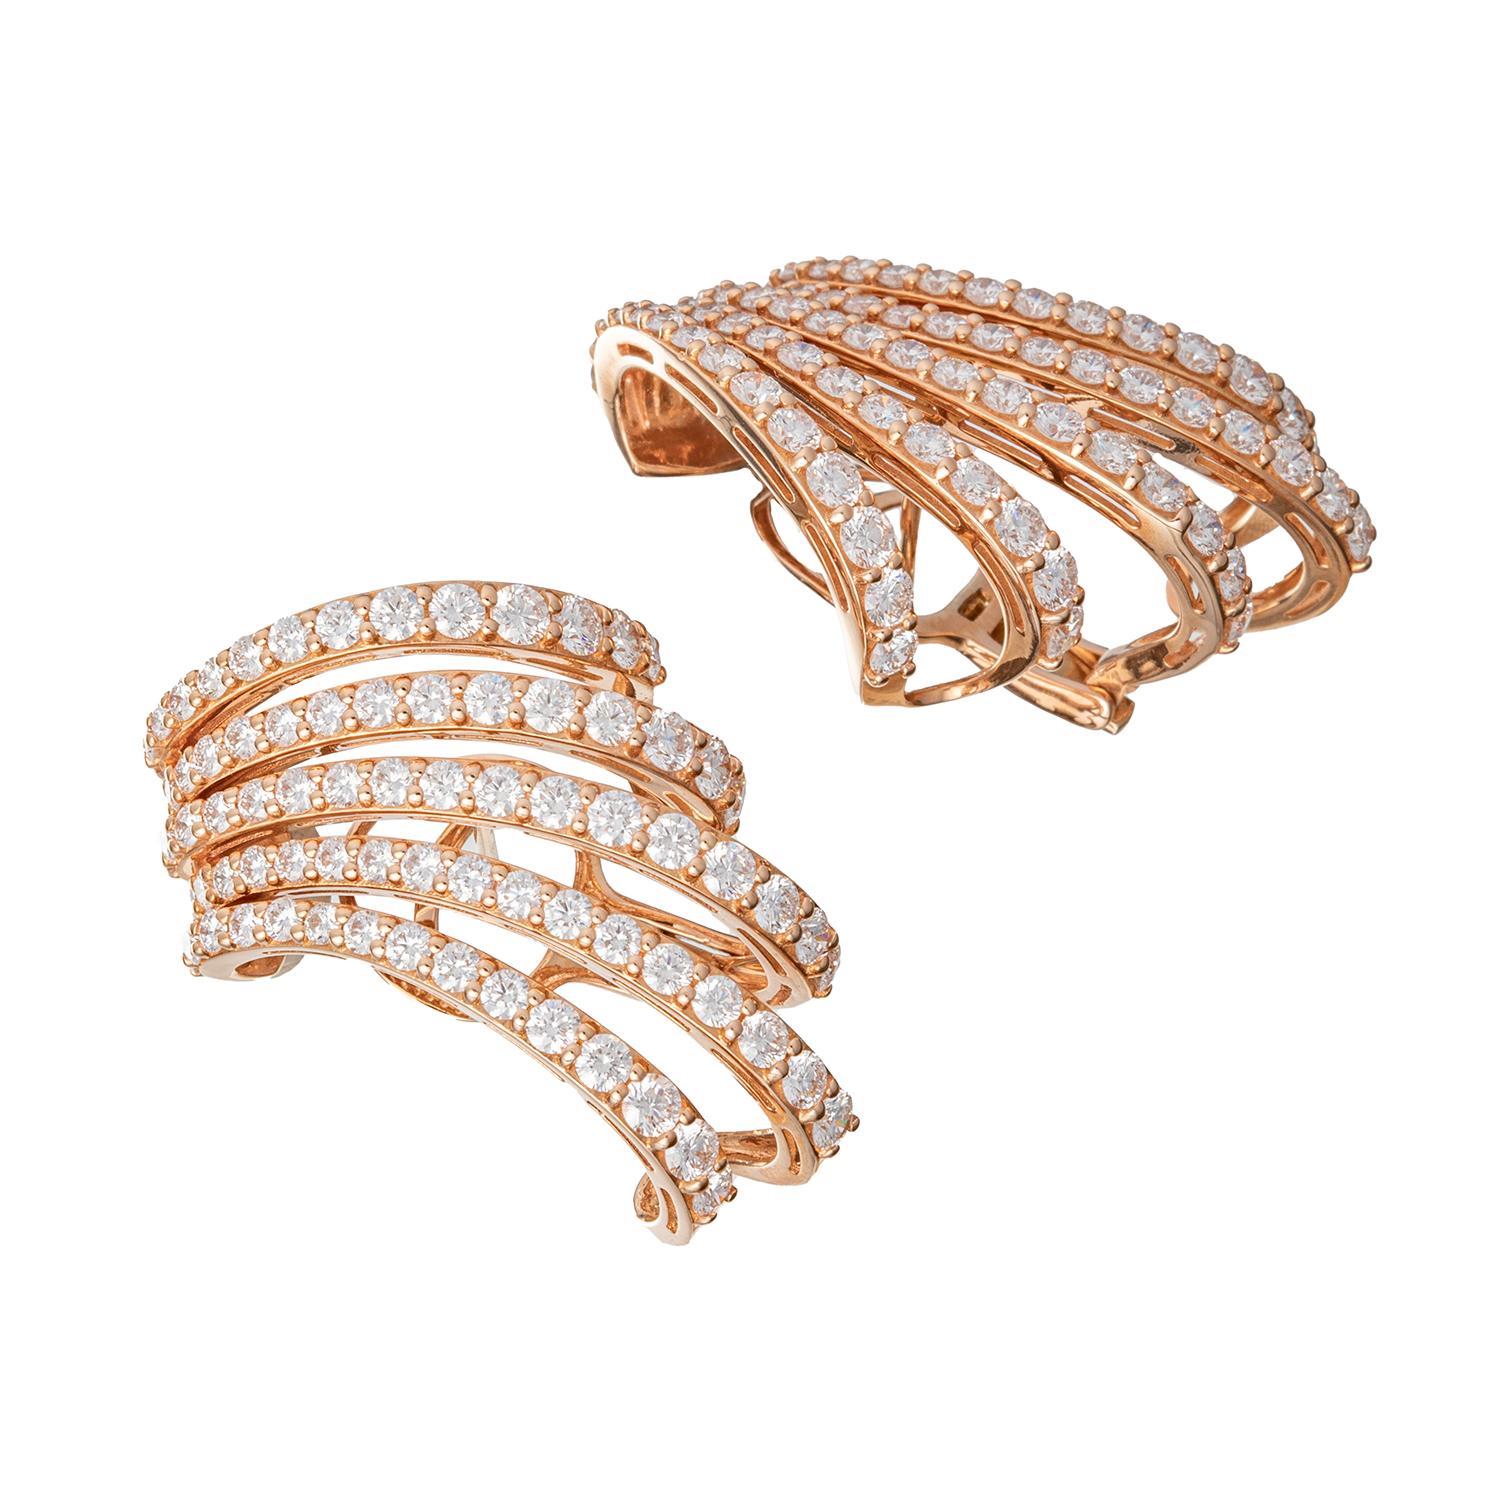 Lobe cuff earrings, featuring five graduating rows of round brilliant-cut diamonds that wrap around the ear lobe. Handmade in polished 18k rose gold.  Diamonds weighing 5.36 total carats.  Clip backs with posts.  Handmade in Italy by Leo Pizzo. 